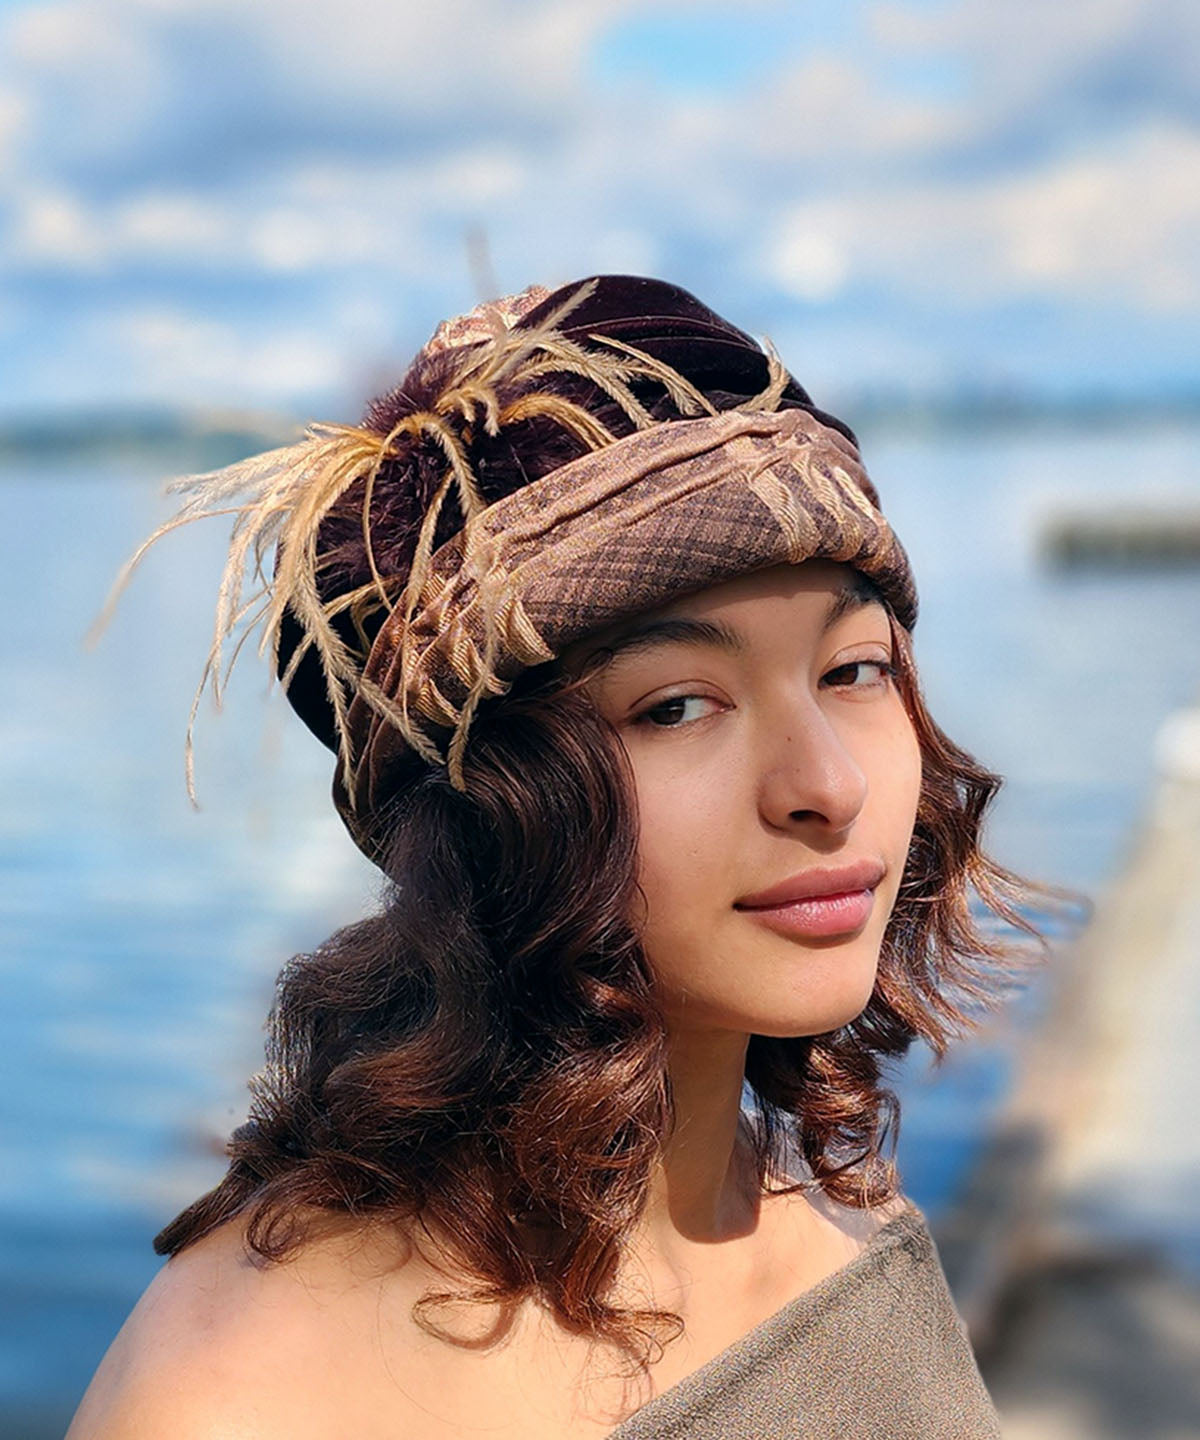 Women wearing Ana Cloche Style Hat in Copper Plaid with Camel and Chocolate Ostrich Feather Brooch | Handmade By Pandemonium Seattle | Seattle WA USA